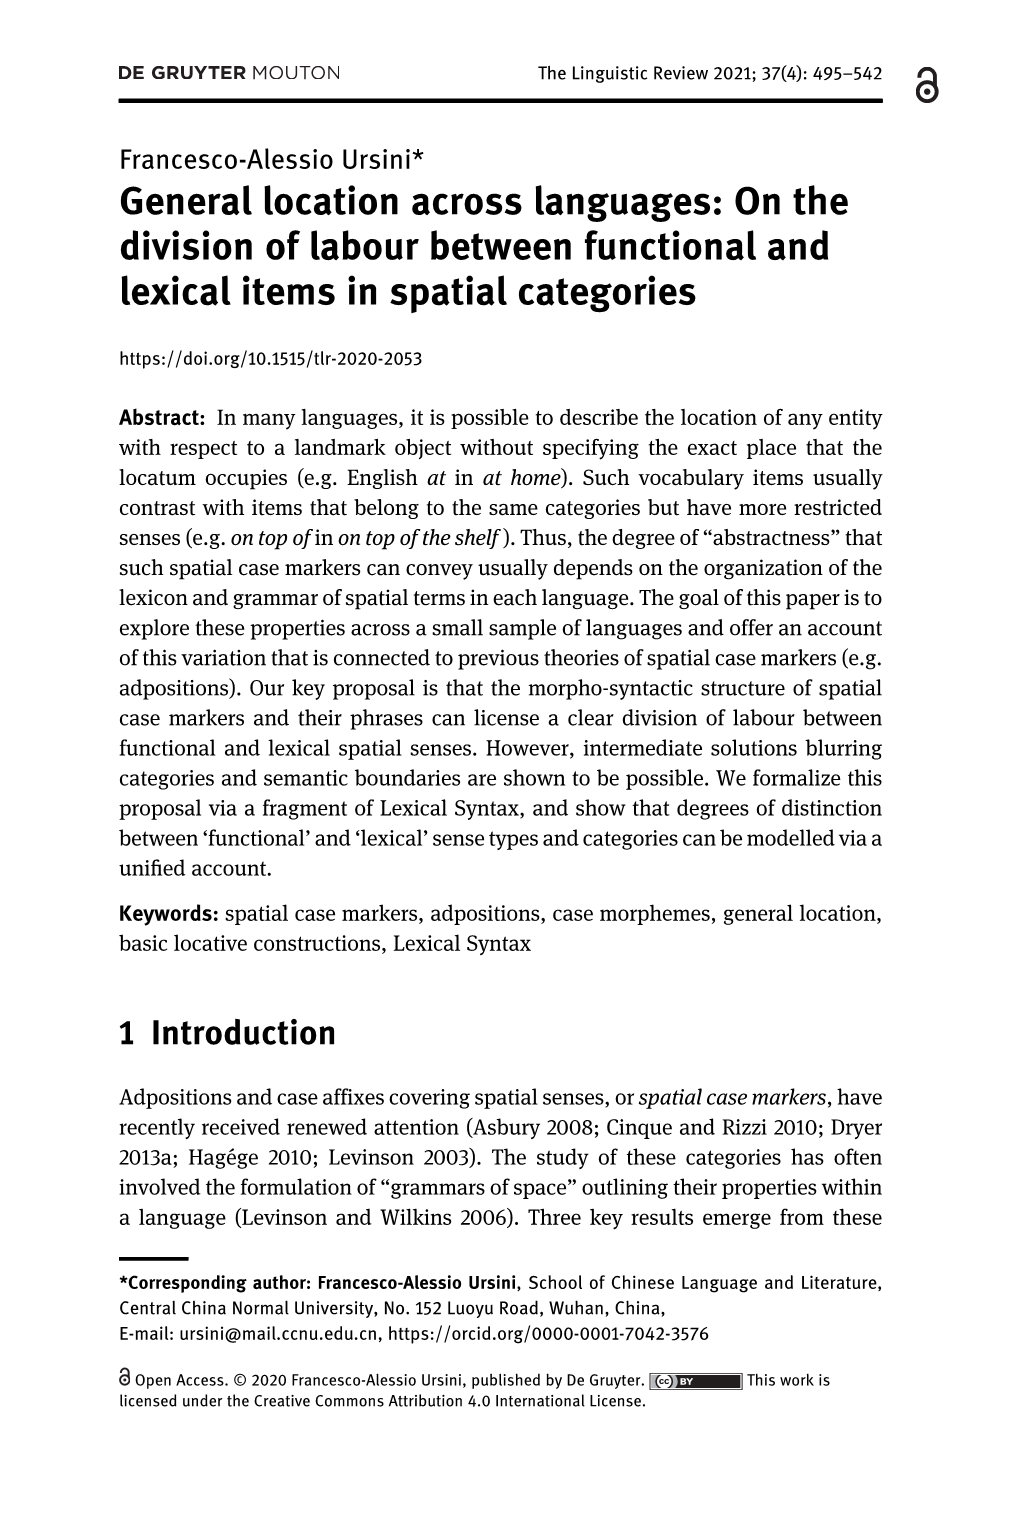 General Location Across Languages: on the Division of Labour Between Functional and Lexical Items in Spatial Categories